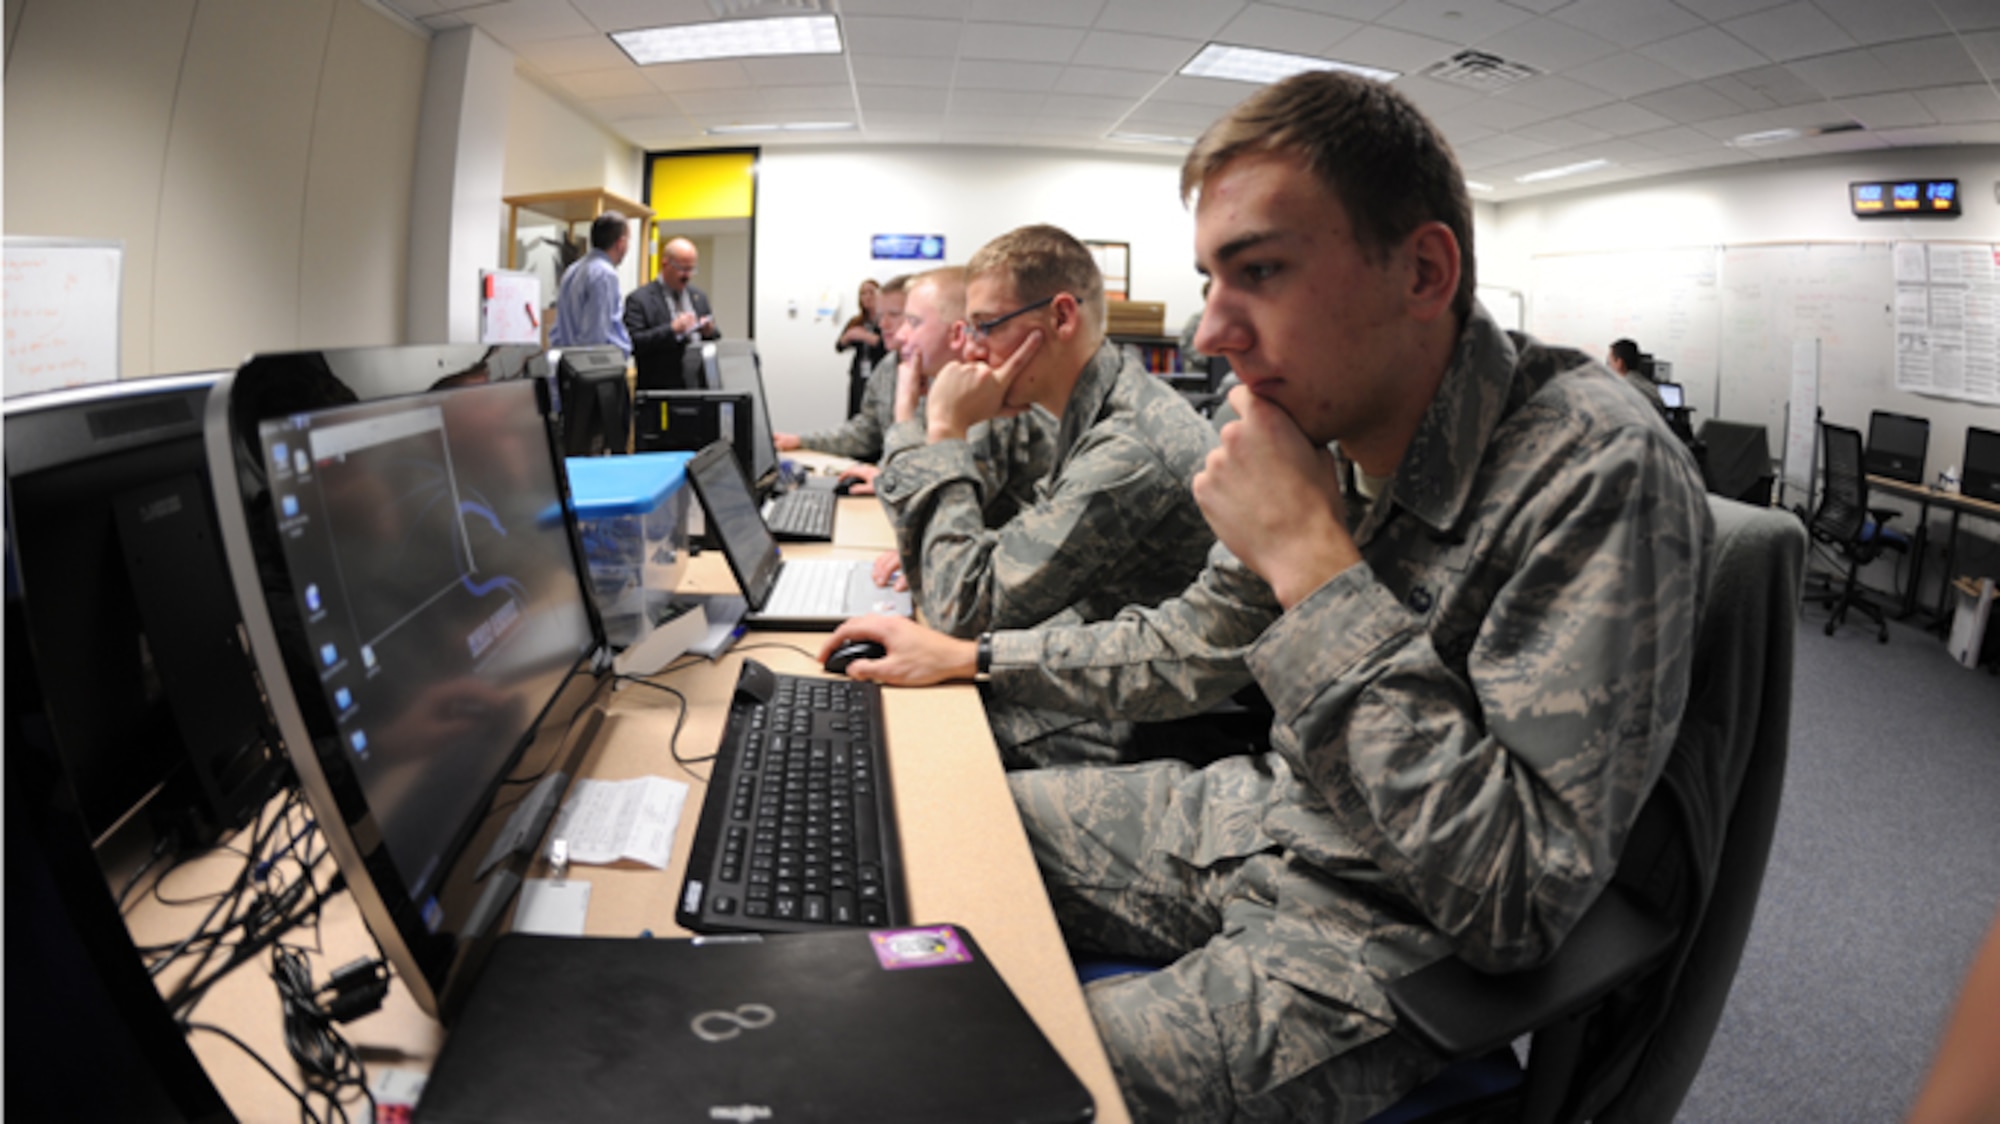 Members of the Academy Cyber Competition team run through scenarios in preparation for an upcoming competition Dec. 10, 2013, at the U.S. Air Force Academy, Colo. The team took second place at the conclusion of the 14th annual National Security Administration inter-service Cyber Defense Exercise here April 8-11. (U.S. Air Force Photo/John Van Winkle) 